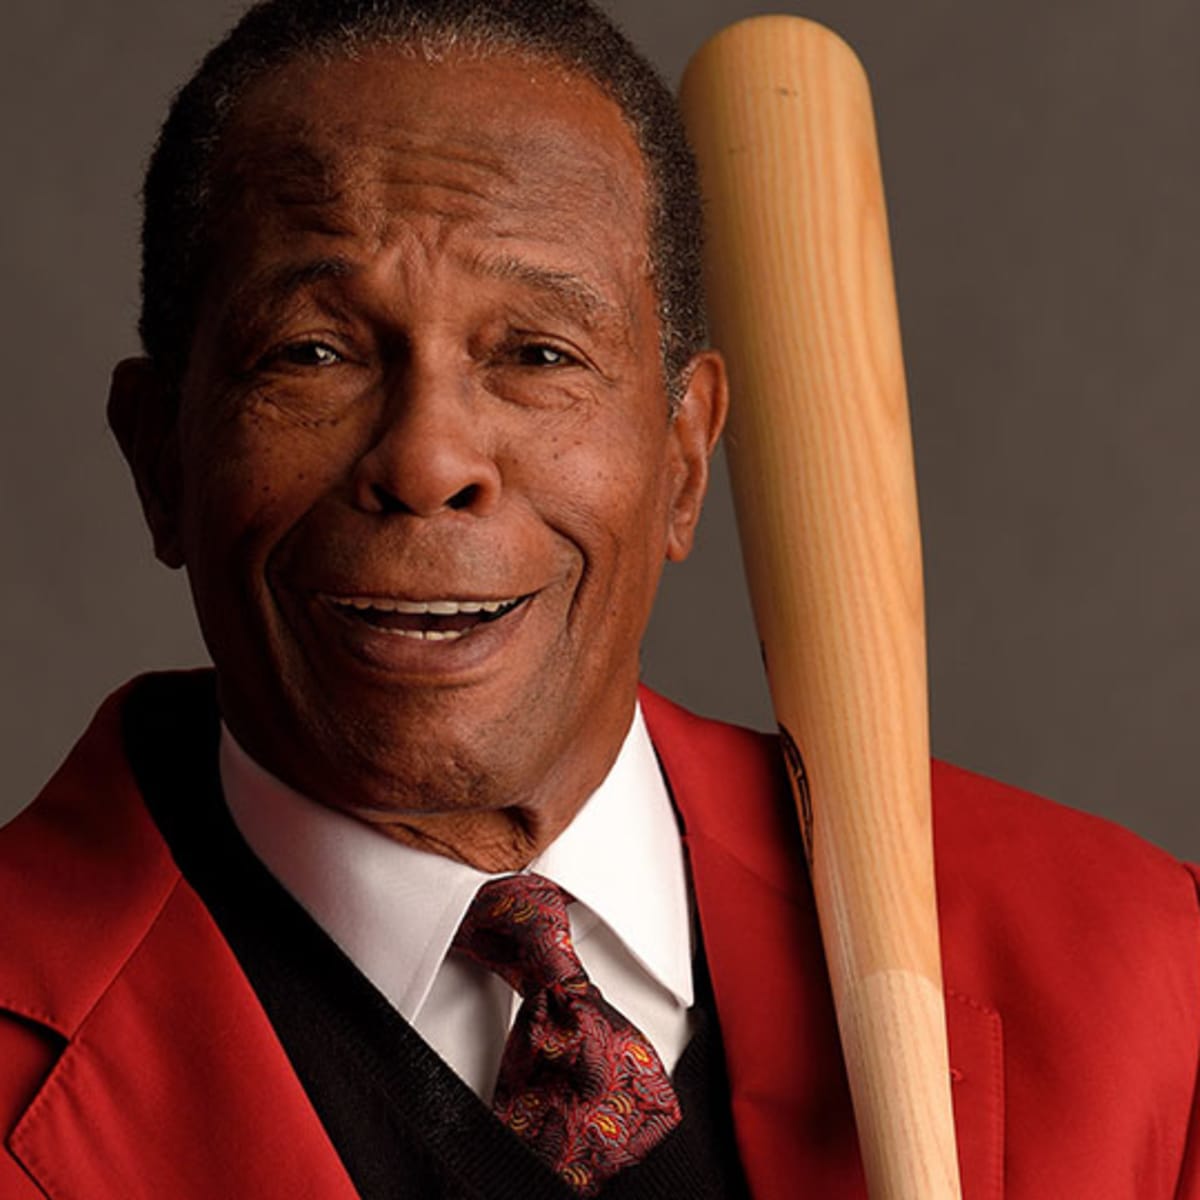 Rod Carew recovering from massive heart attack with a life-saving